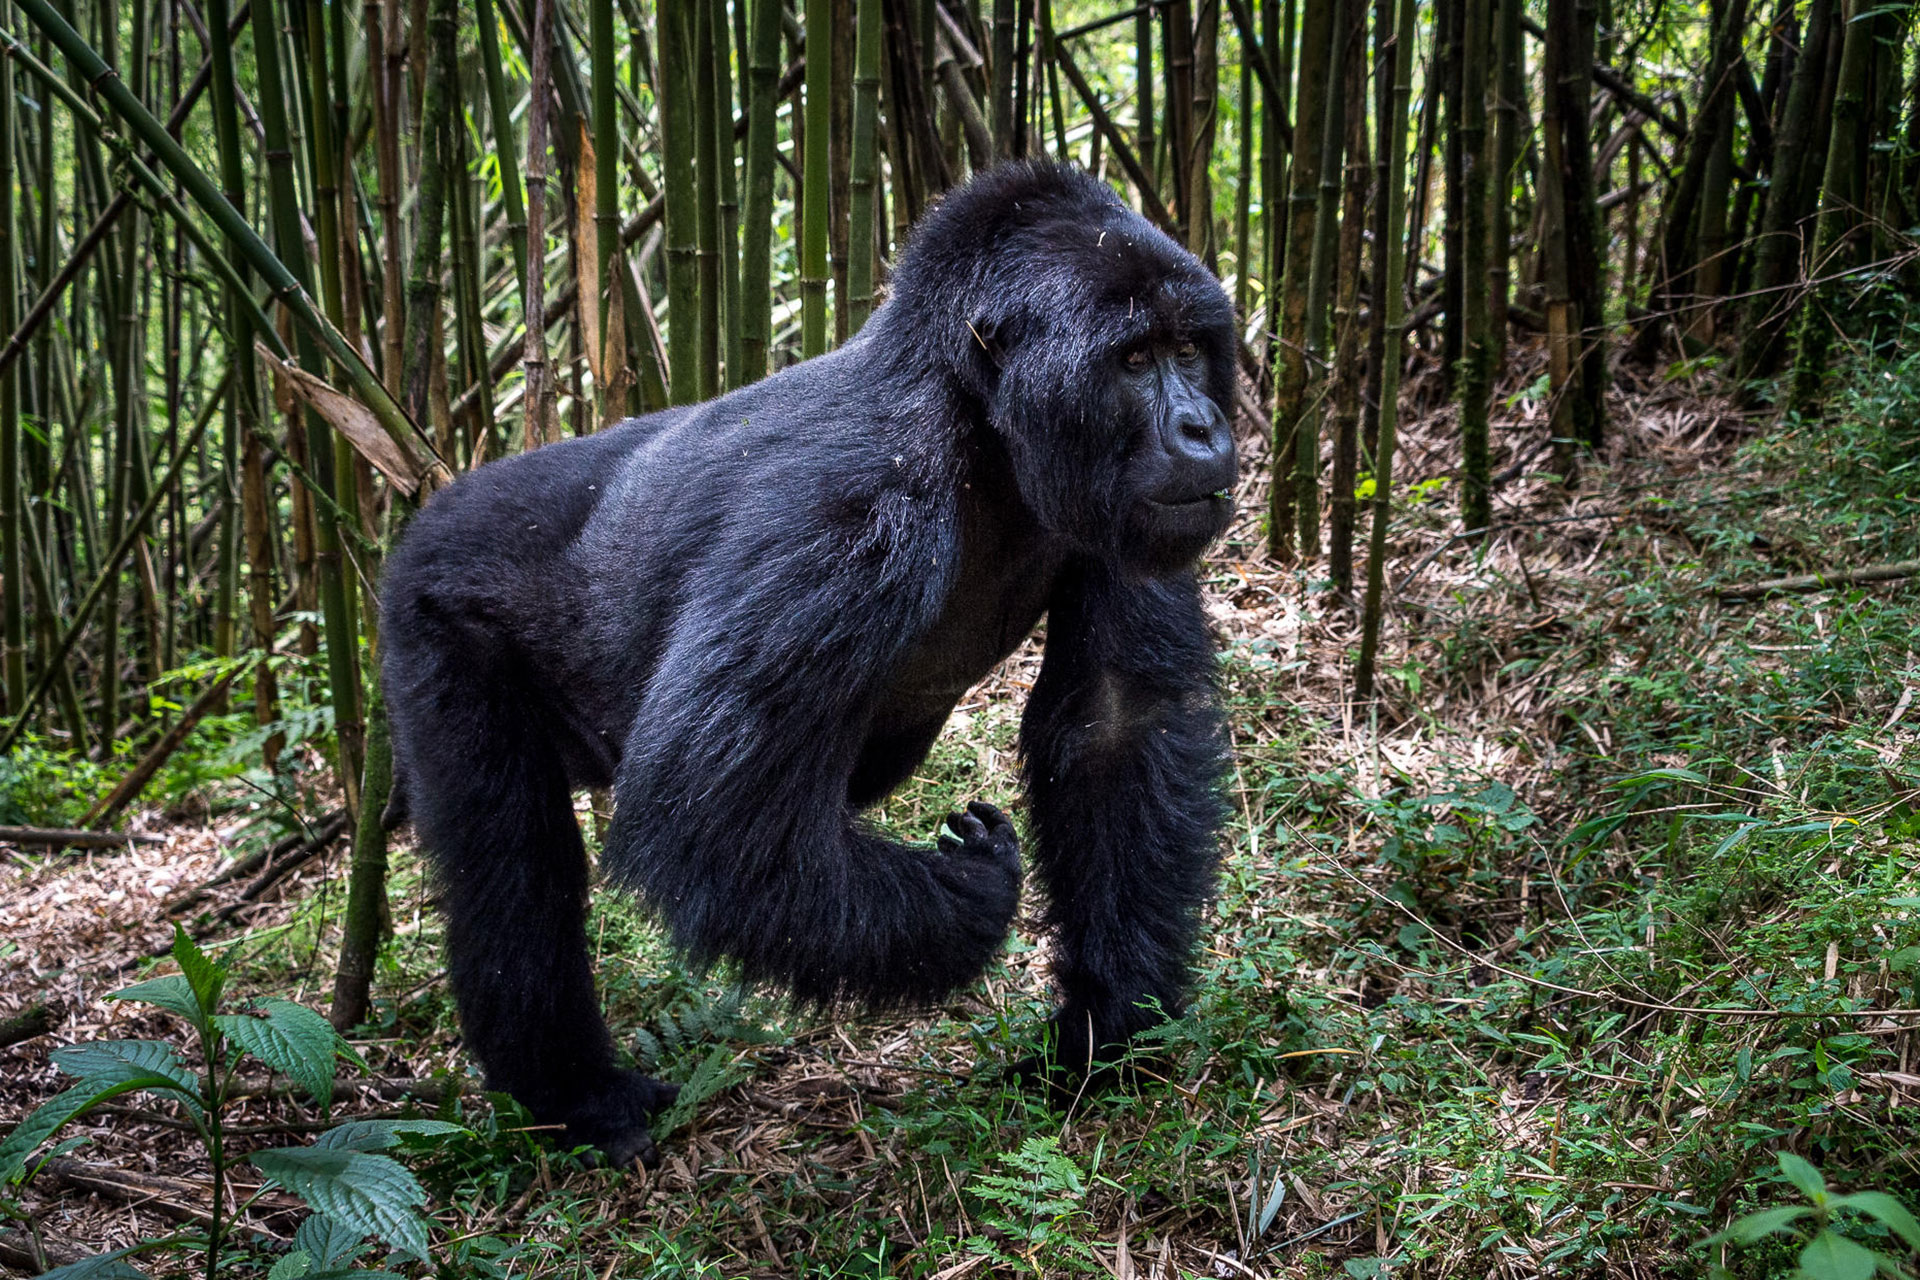 A large silverback gorilla walking through the forest